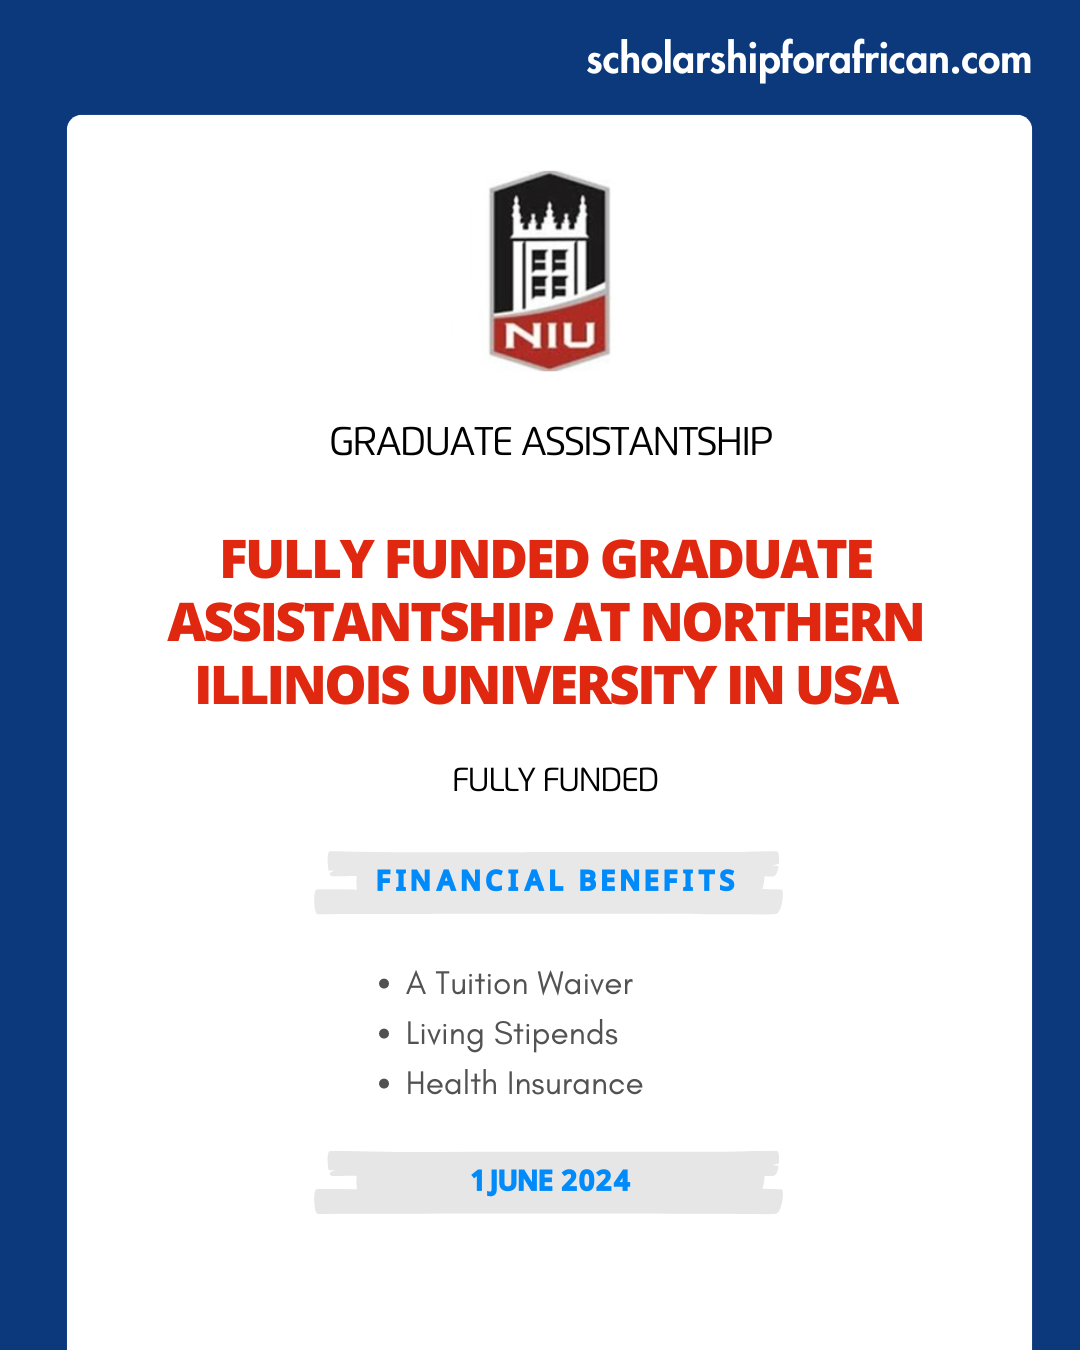 Fully Funded Graduate Assistantship at Northern Illinois University in USA